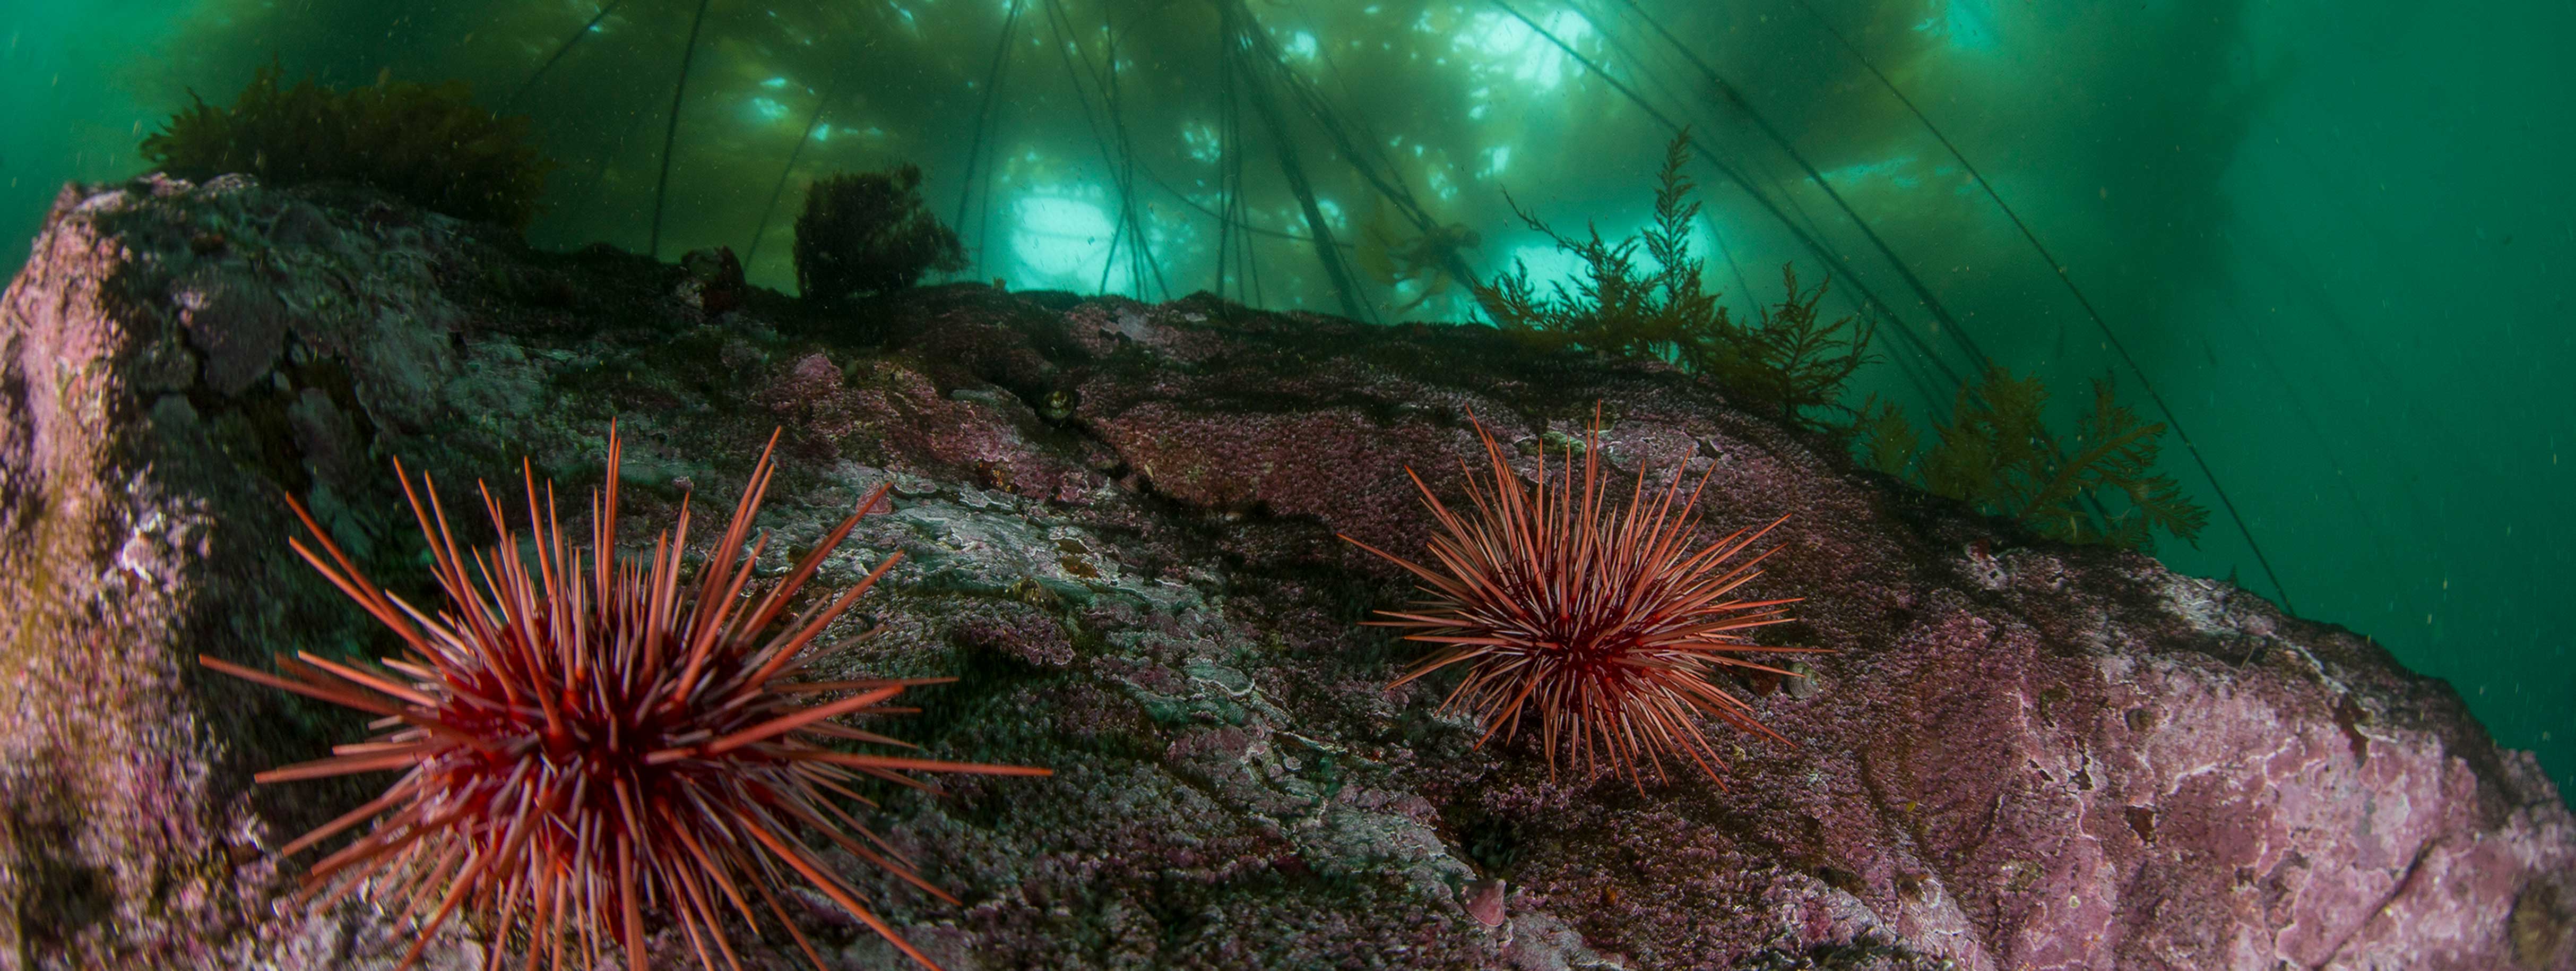 An underwater scene showing sea urchins and seaweed in murky green water